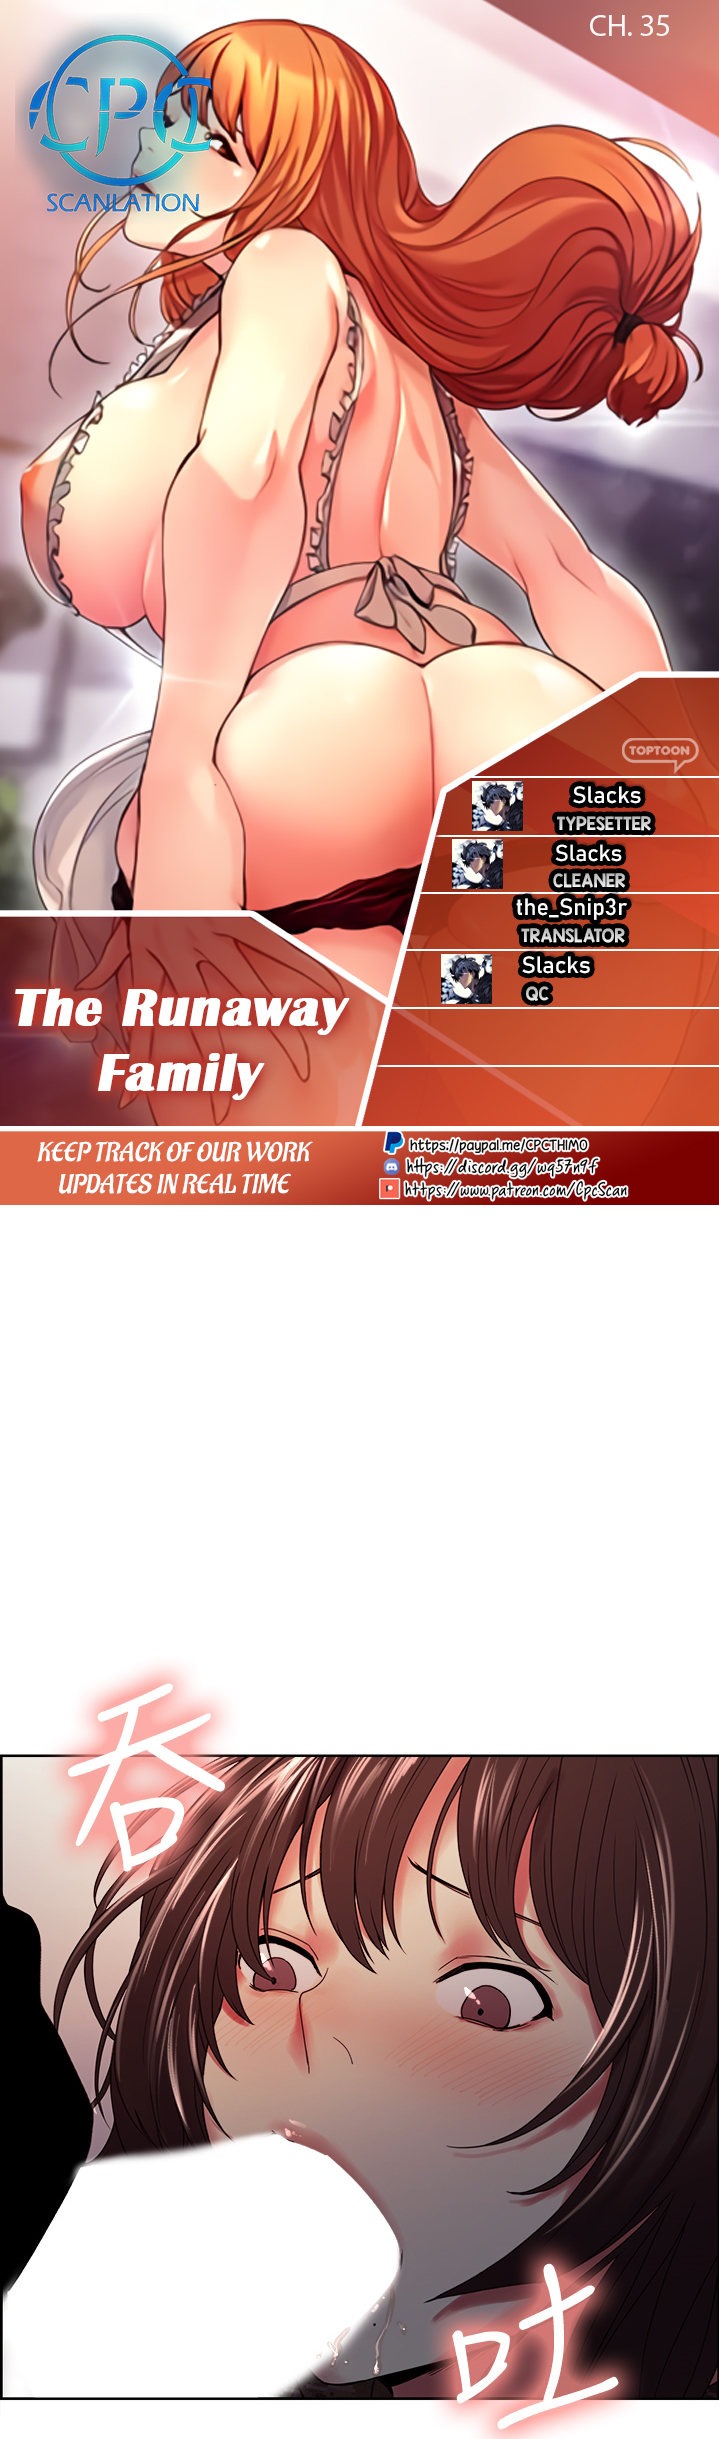 The Runaway Family - Chapter 35 Page 1